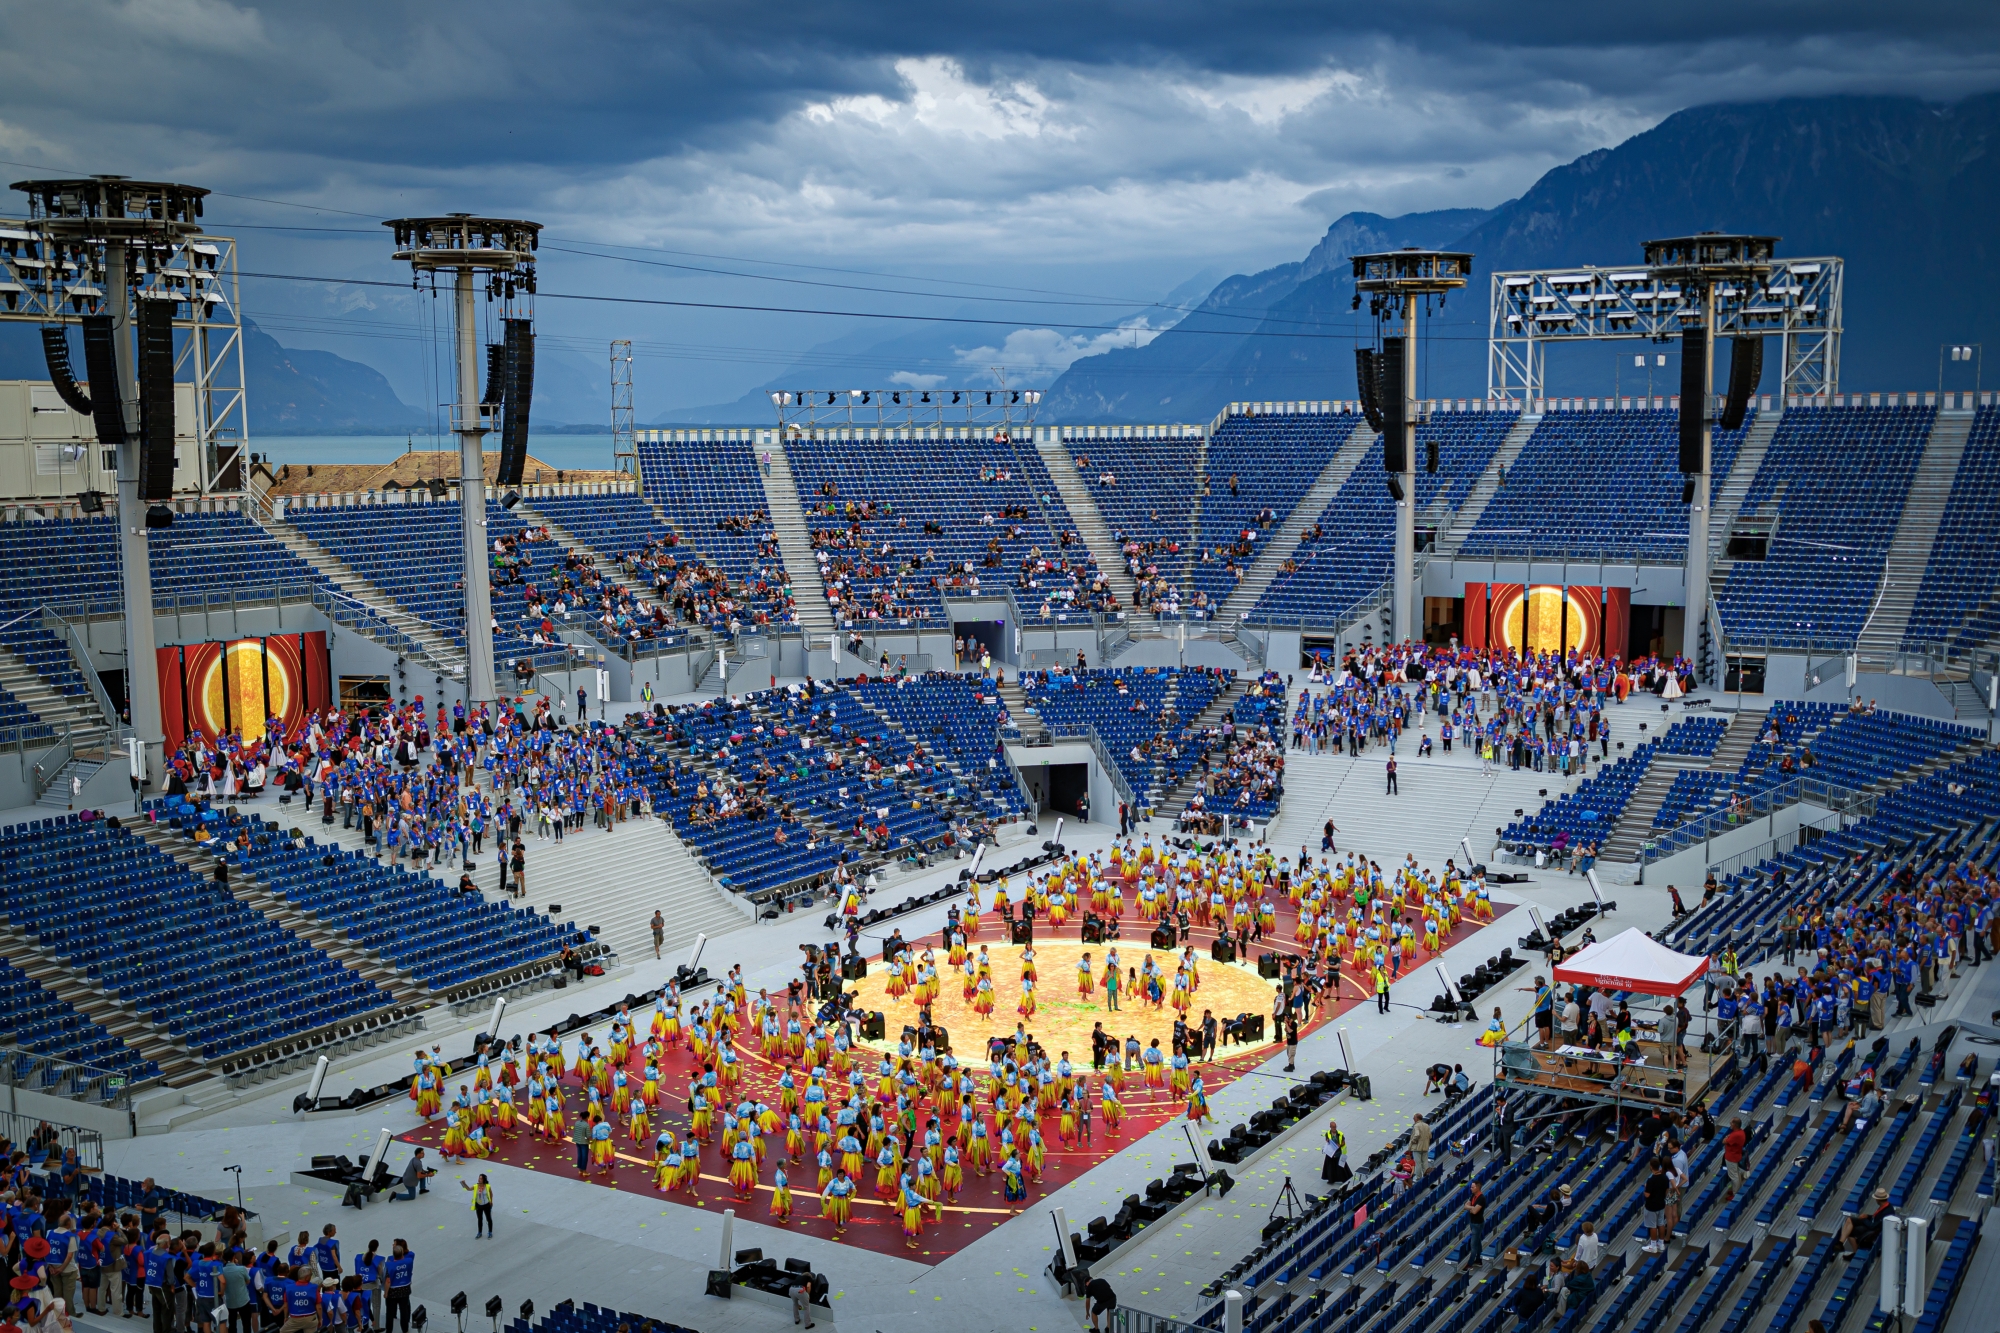 Extras are pictured in the arena of the "Fete des Vignerons" (winegrowers' festival in French), with a capacity of 20'000 spectators and hosting a giant central LED floor of approximately 800 square meters, during a rehearsal in Vevey, Switzerland, Thursday, May 20, 2019. Organized in Vevey by the brotherhood of winegrowers since 1979, the event will celebrate winemaking from July 18 to August 11 this year. (KEYSTONE/Valentin Flauraud)..Des figurants sont photographies dans l'arene de la Fete des Vignerons (FEVI) et son sol en LED geant d'approximativement 800 metres carres pendant une repetition ce jeudi 20 juin 2019 a Vevey.  (KEYSTONE/Valentin Flauraud) SWITZERLAND FETE DES VIGNERONS REHEARSAL